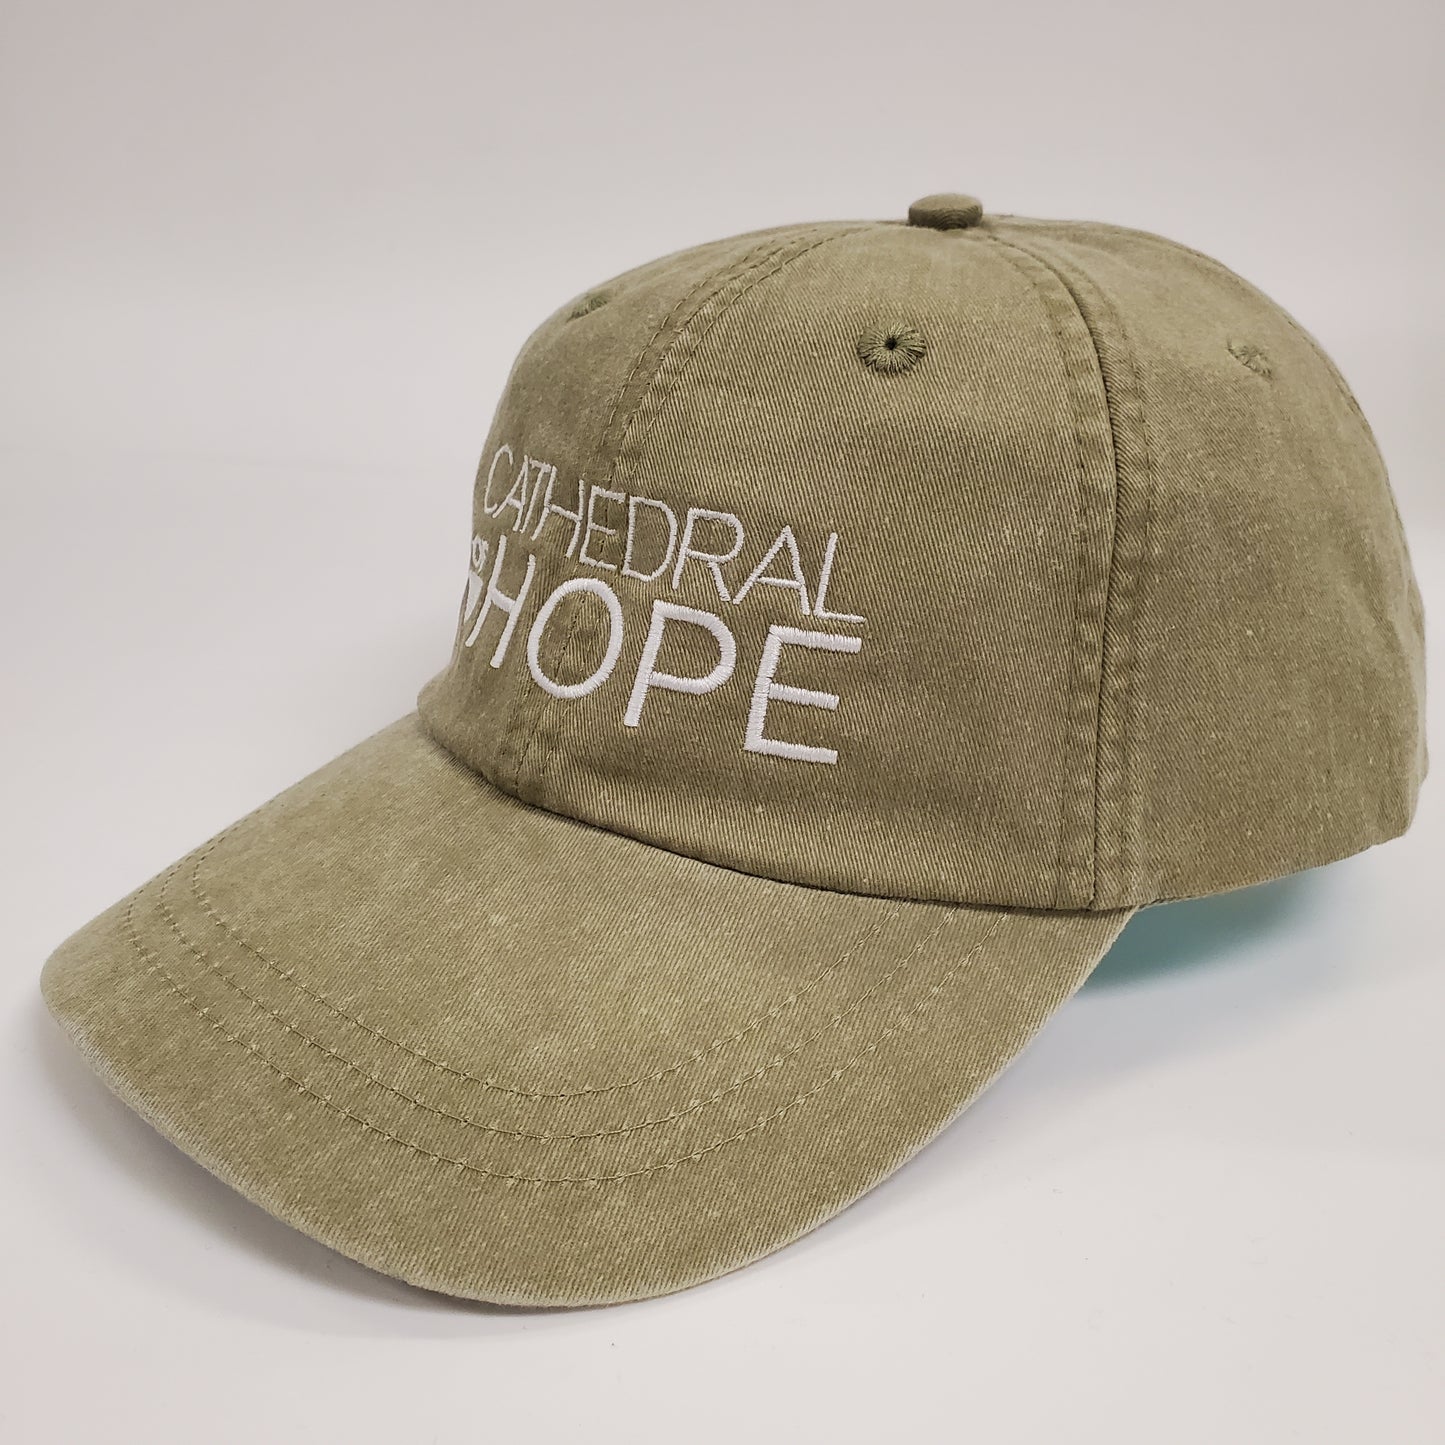 Cathedral of Hope Ball Cap